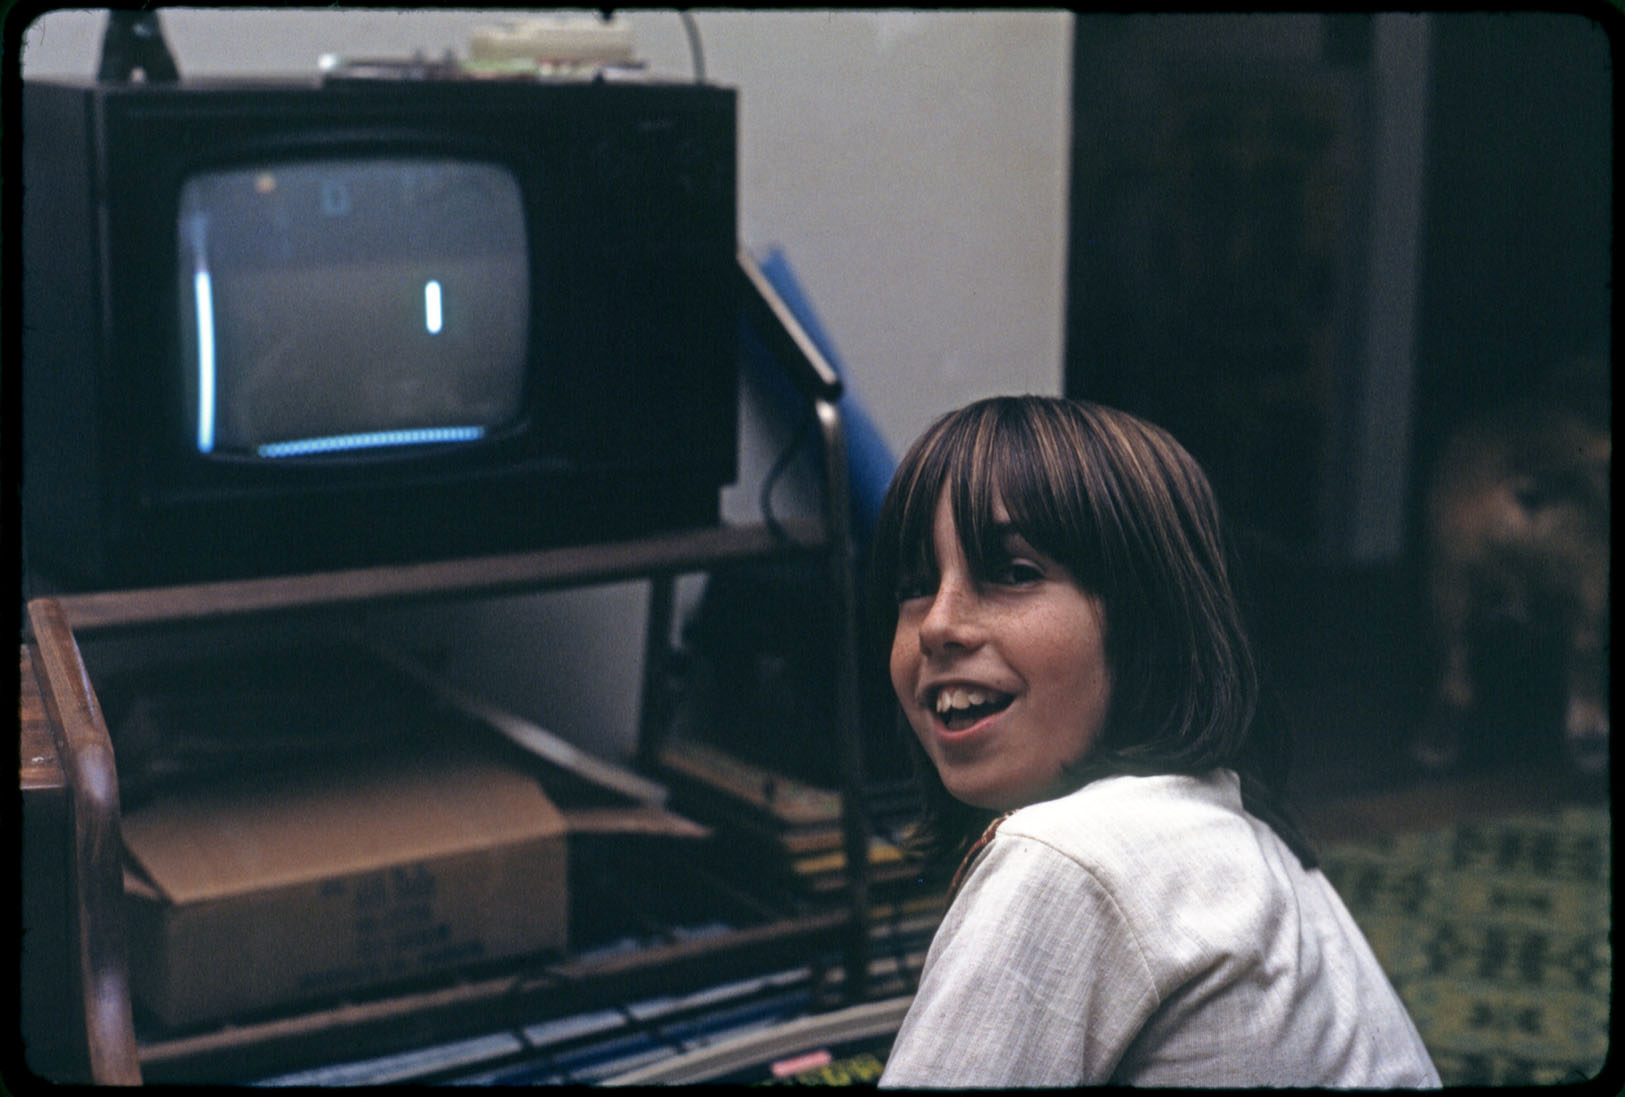 My nephew David and Pong, December 25, 1976. Man, lookit them graphics! From my underexposed Kodachrome slide.